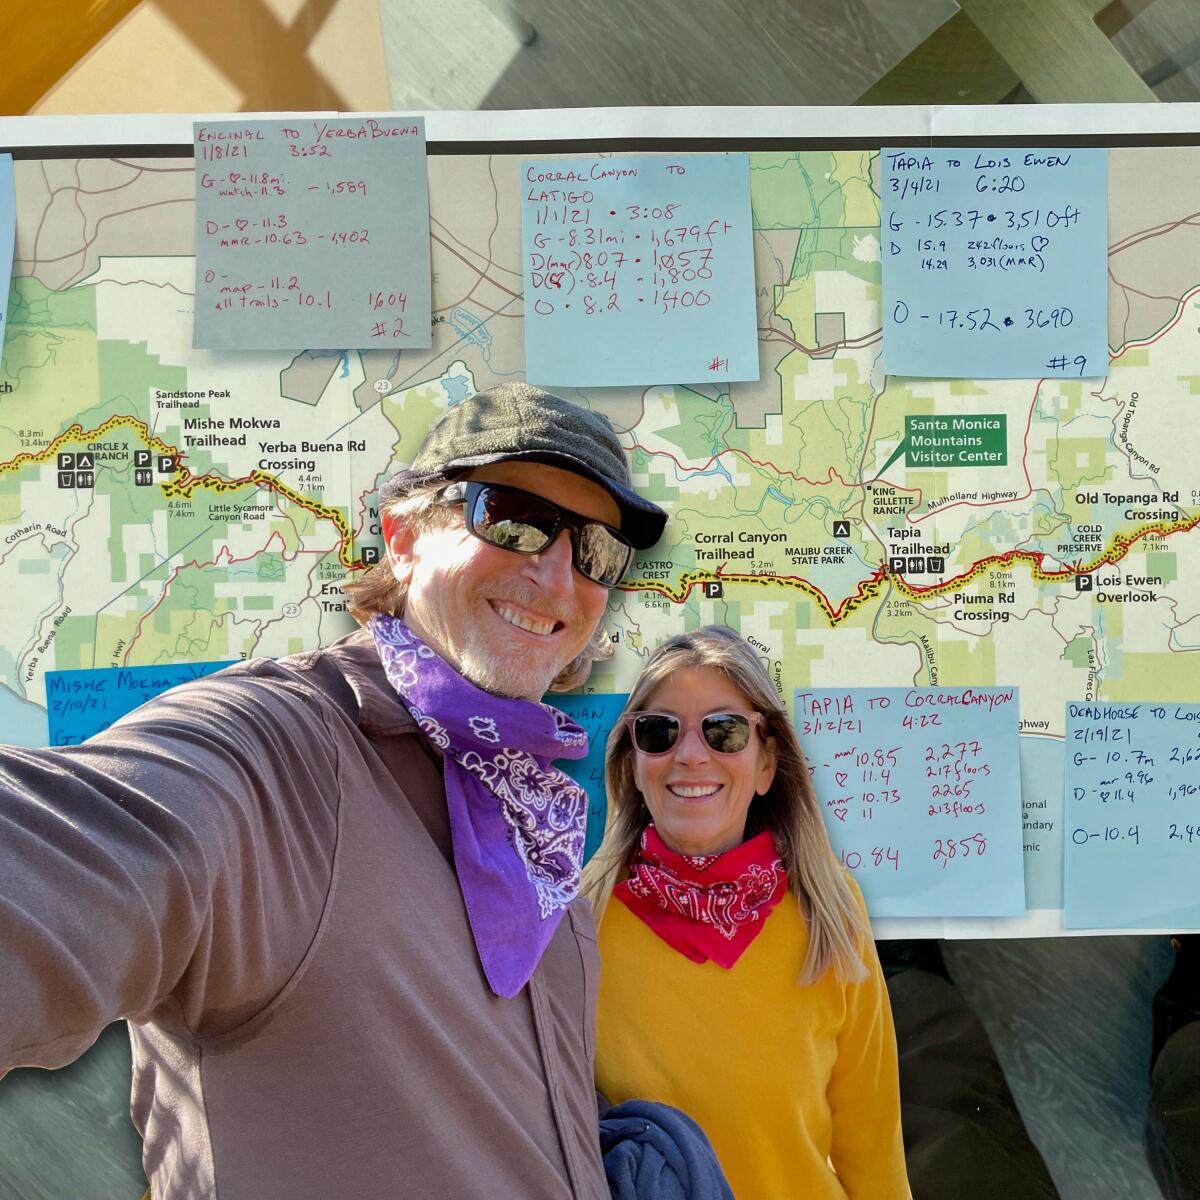 Guy Welles and his wife, Deb Adams-Welles. Their route on the Backbone Trail is behind them.